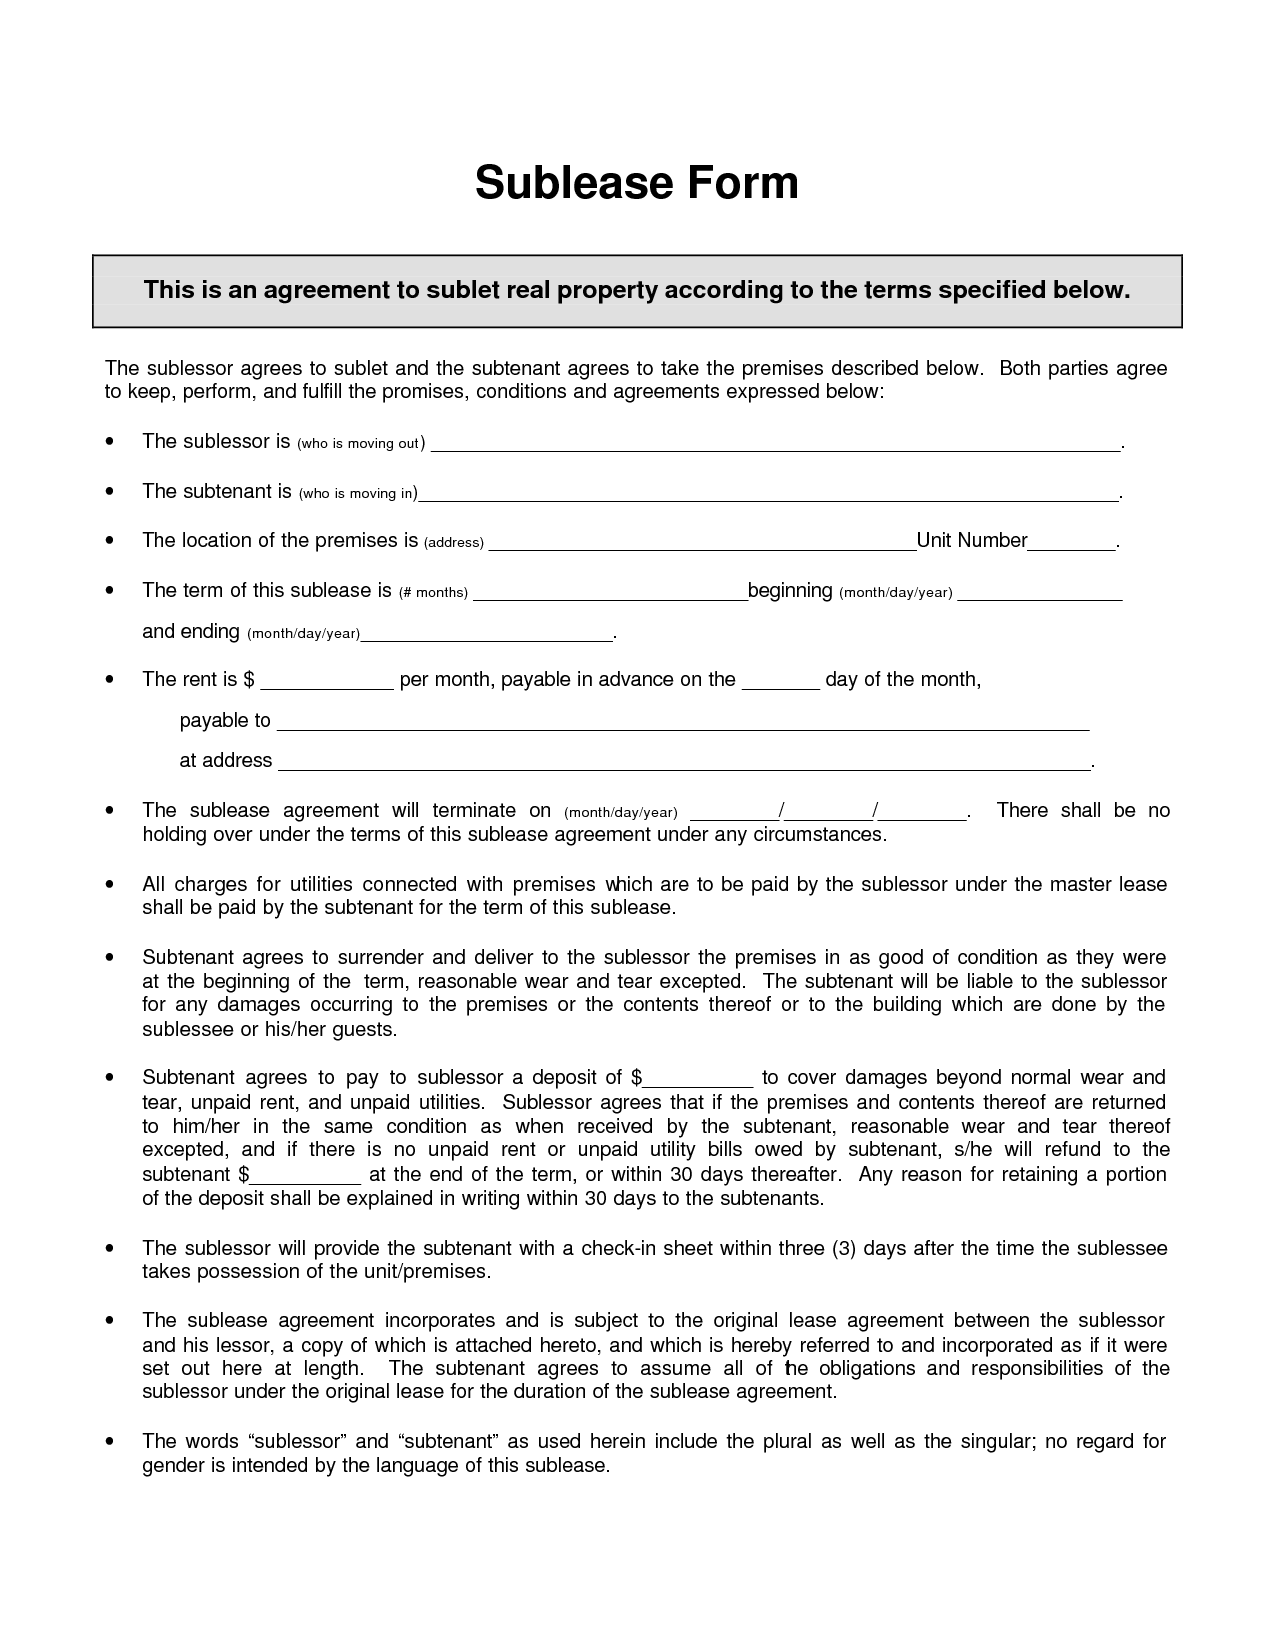 Sublease Agreement Sample Free Printable Documents